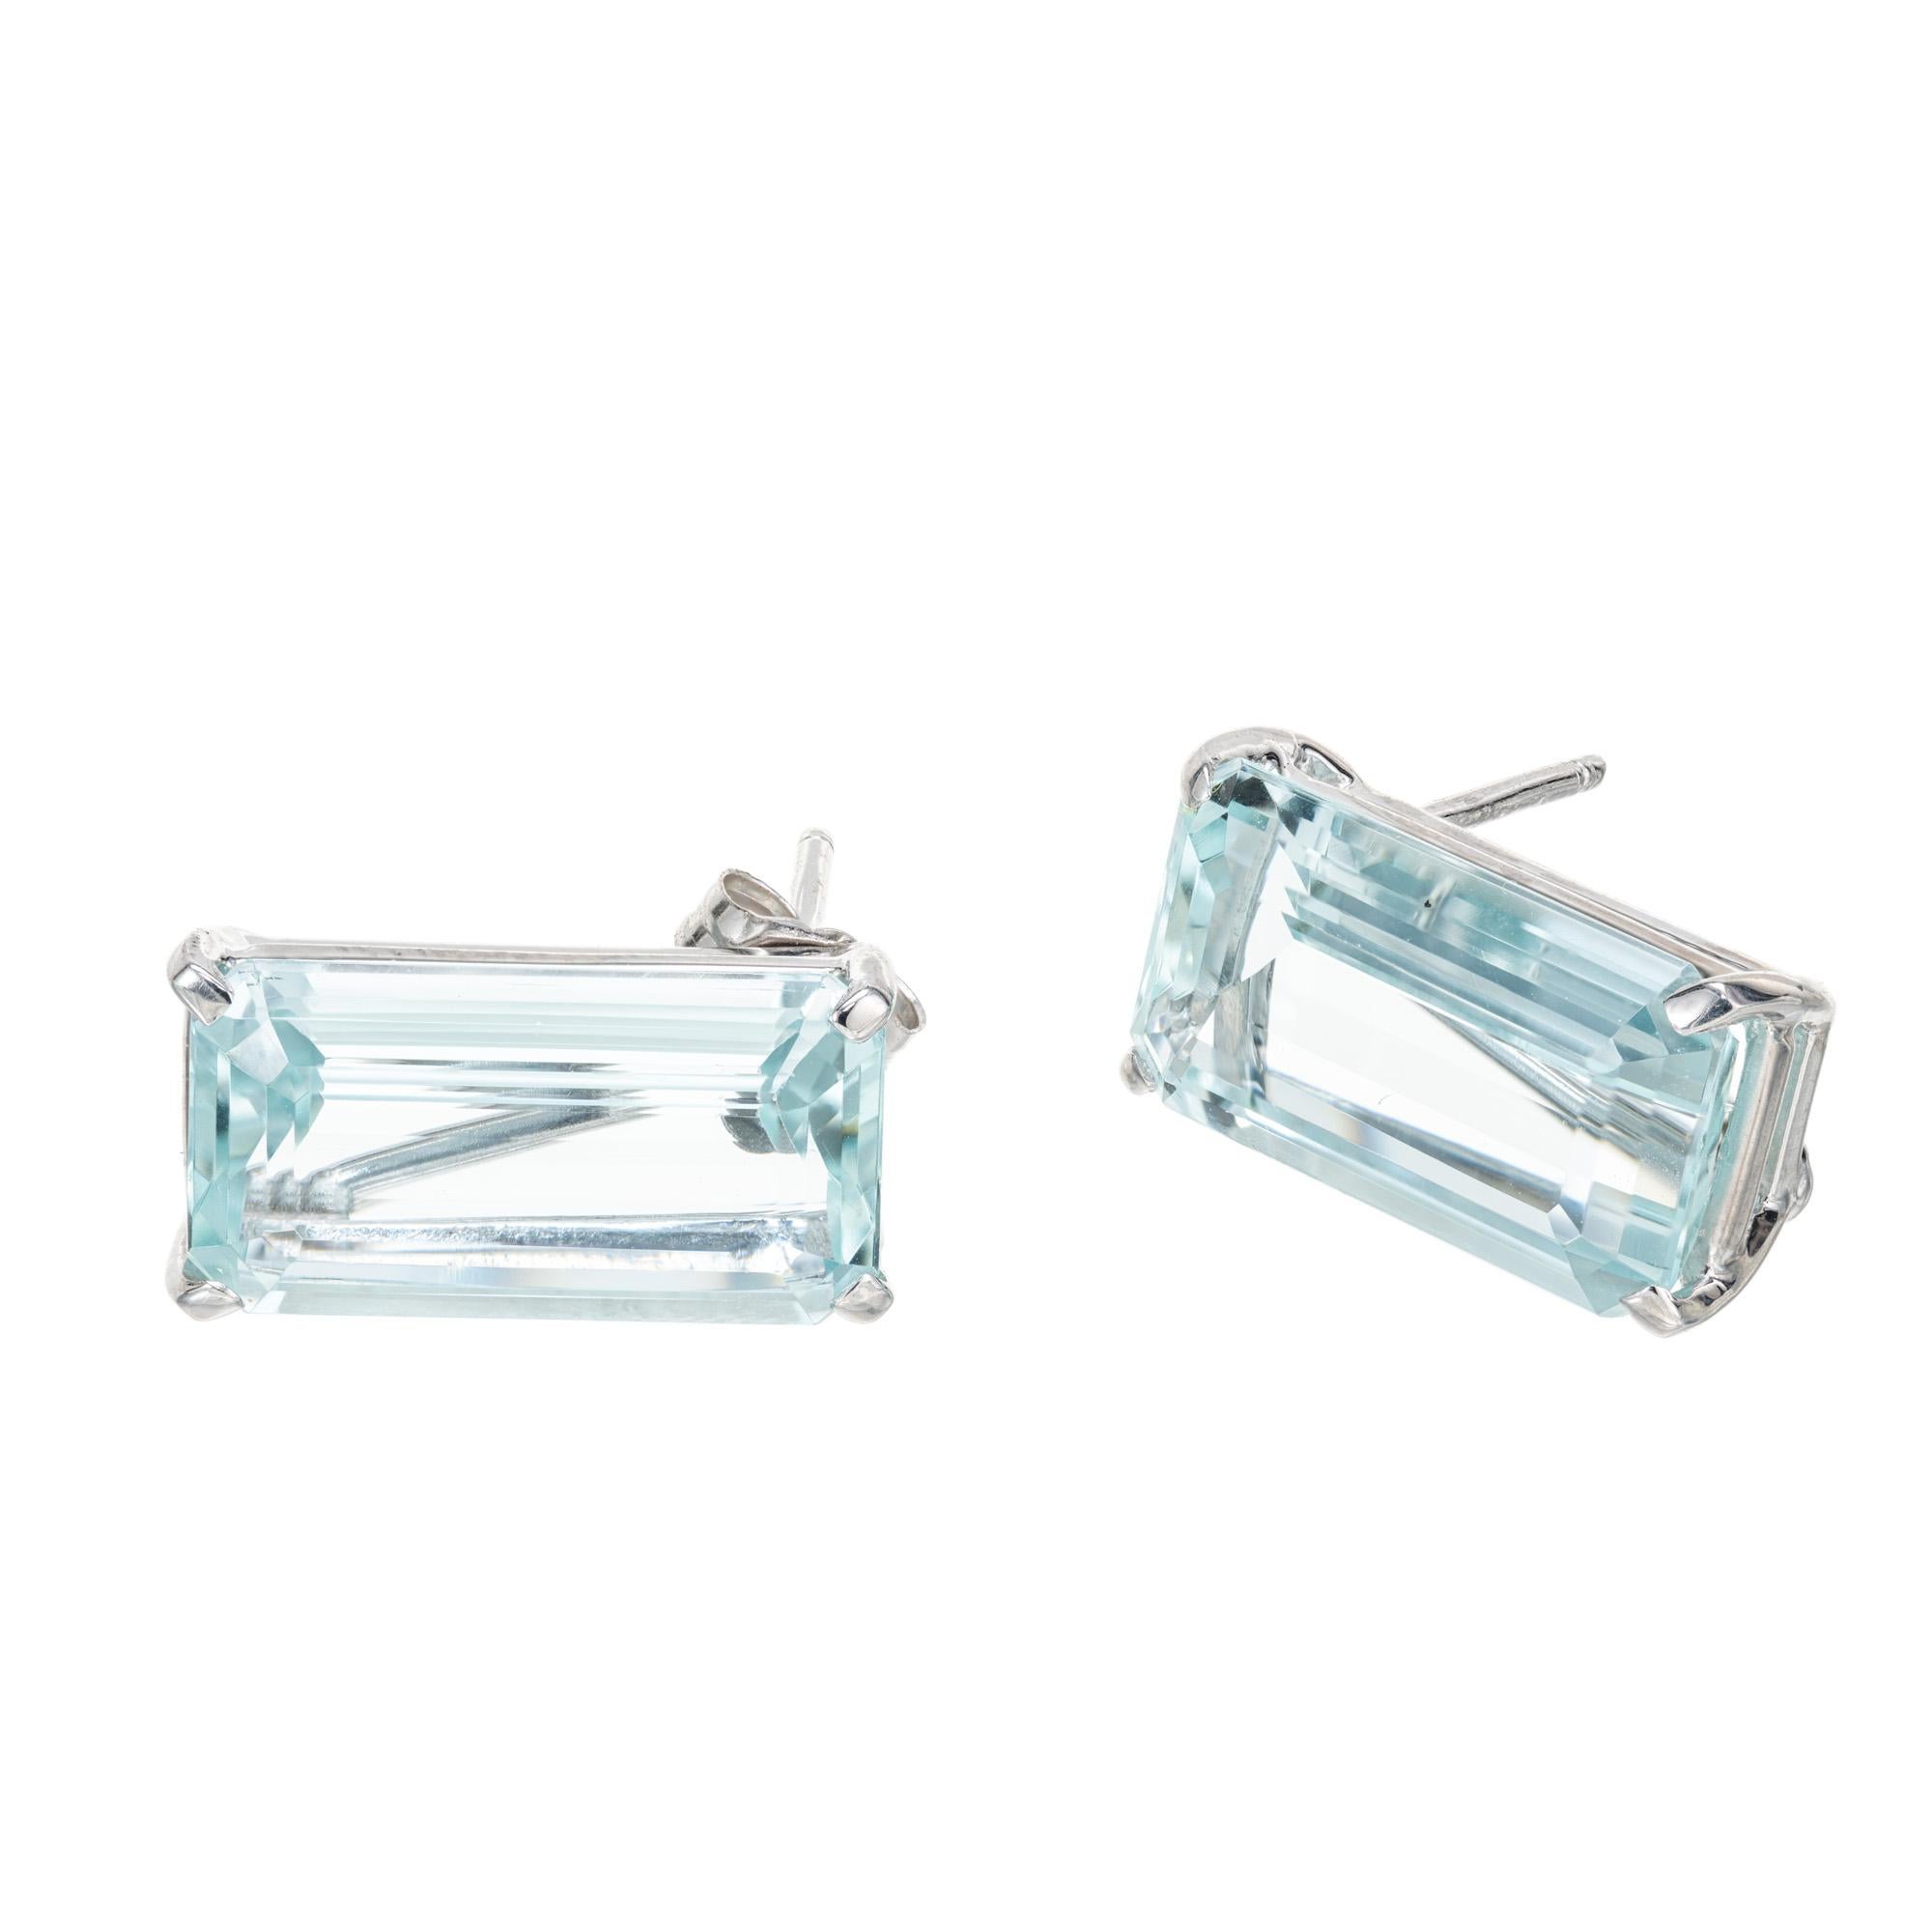 10.27 Carat Emerald Cut Aquamarine White Gold Earrings  In Good Condition For Sale In Stamford, CT